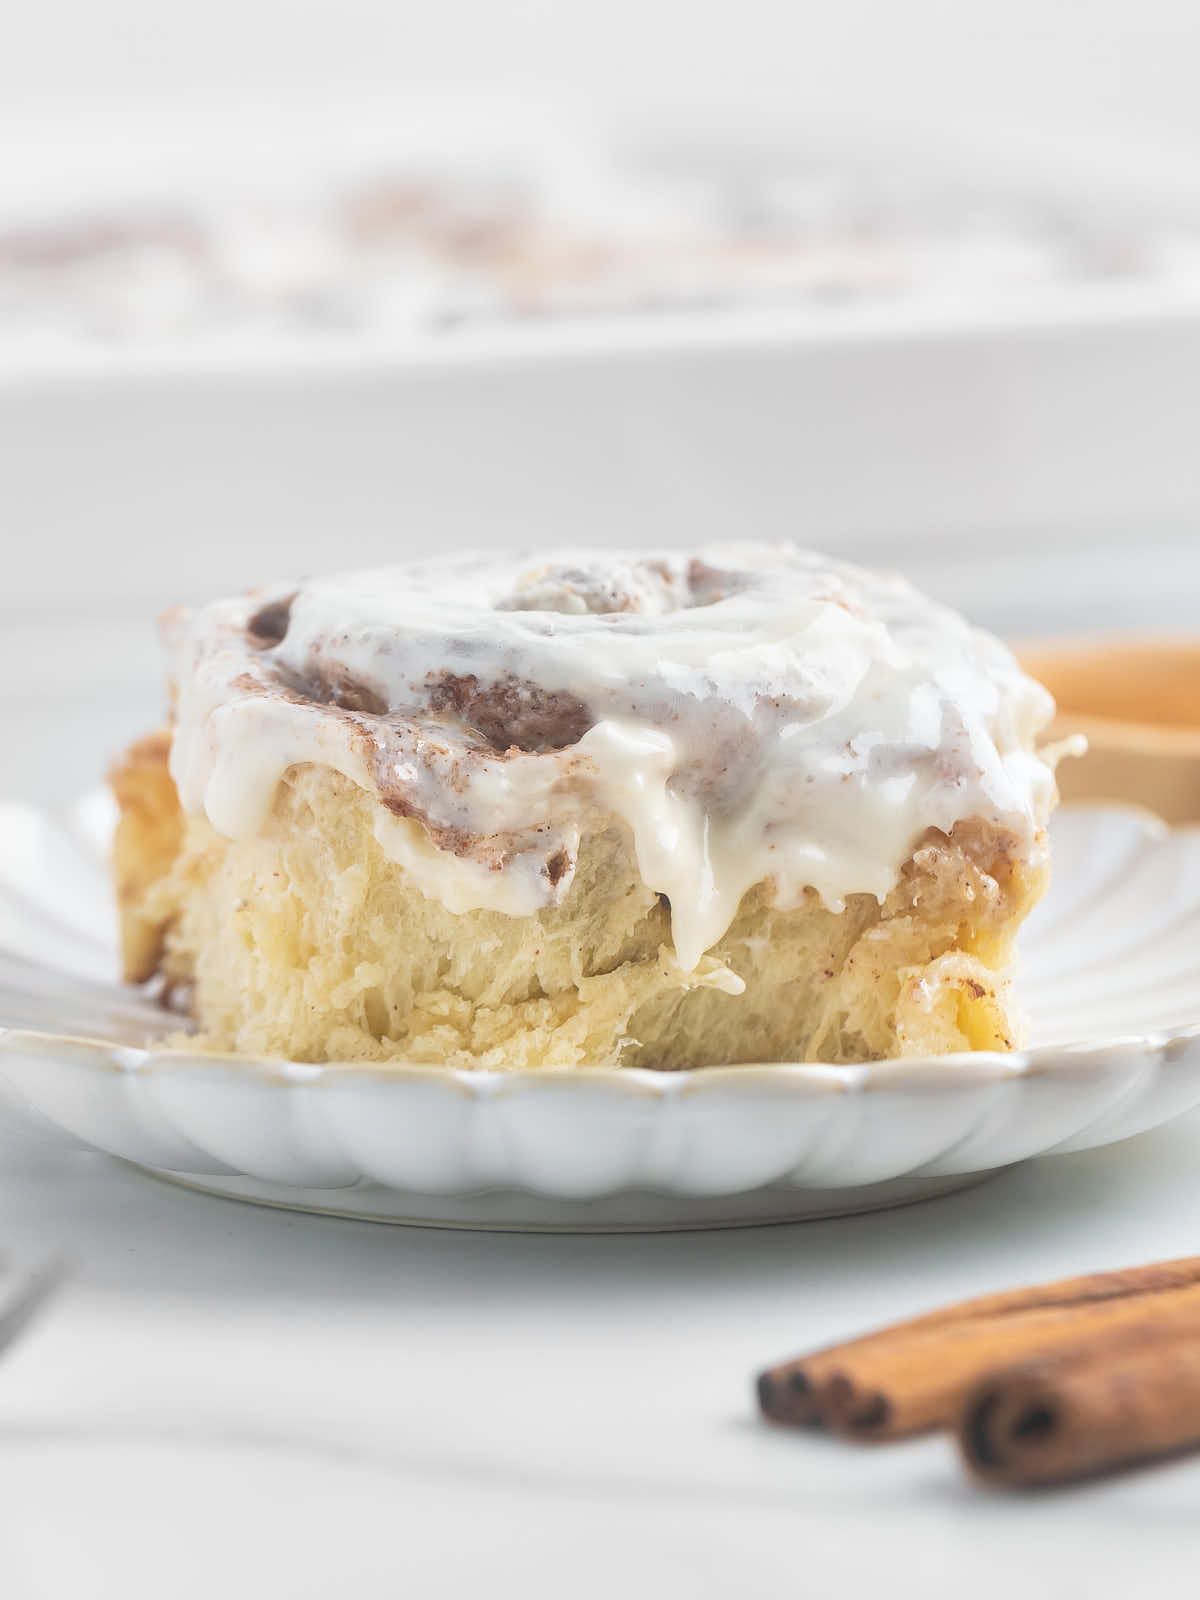 A close-up of an easy homemade Cinnamon Rolls on a plate.